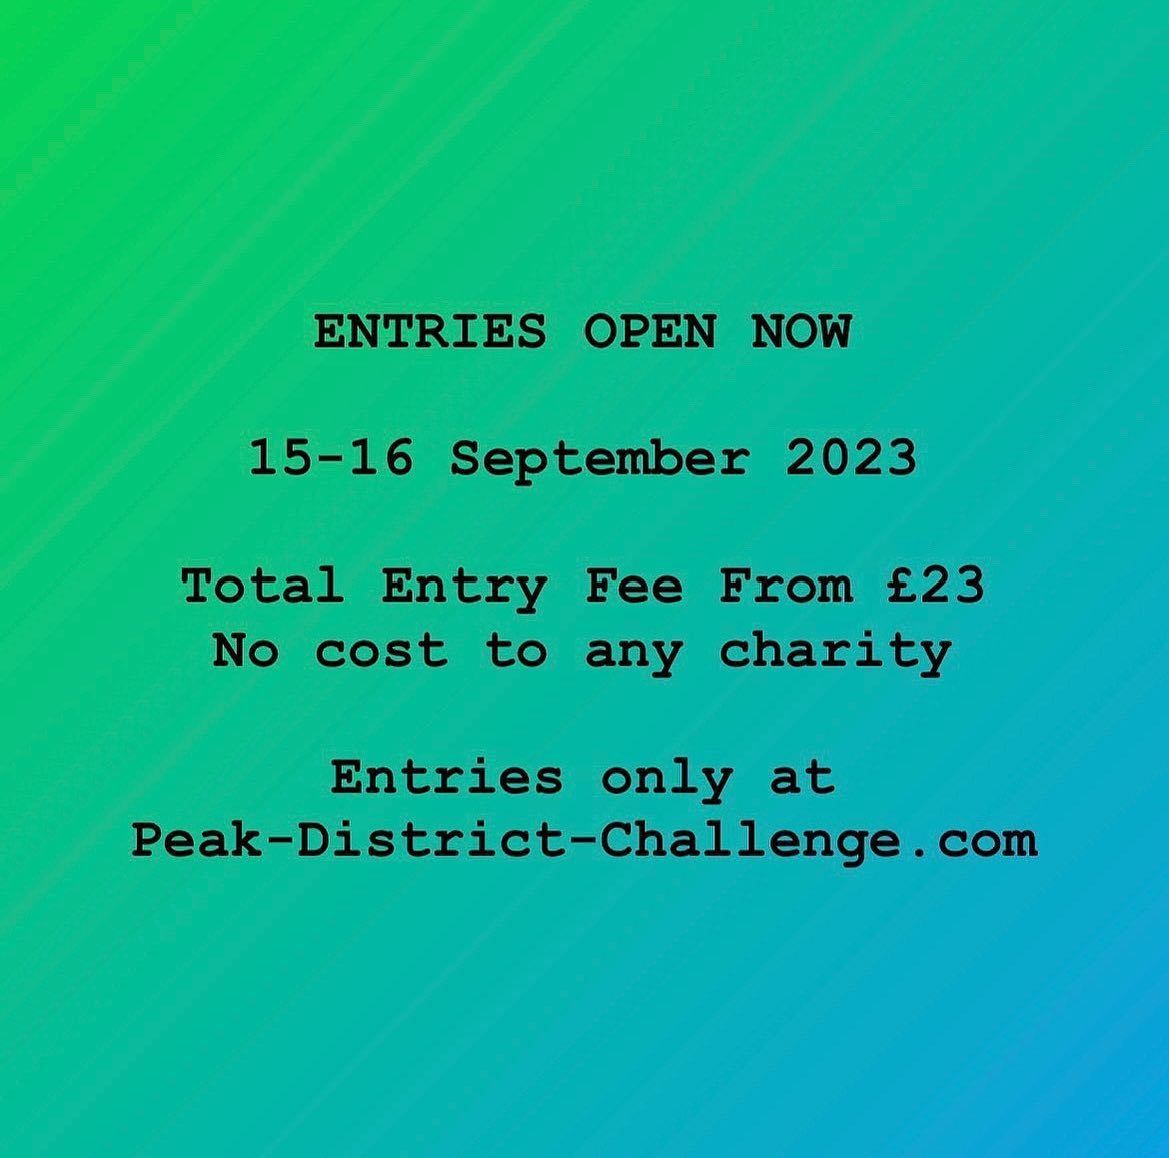 Peak-District-Challenge.com registrations are open with total entry fees from just £23!

Beat your PB, give yourself a new challenge for 2023 or just have a great day out in the Peak District. If you are fundraising, Wilderness Development's event has no hidden costs to your chosen charity: Your entry fee covers all your costs and every penny you fundraise goes towards your charity's good work ⛰🥾⛰ 
.
.
.
#wildernessdevelopment #peakdistrictchallenge #ukhikes #hikebritain #peakdistrictchallenge2023 #originalpeakdistrictchallenge #since2013 #ultrarunning #ultratrailrunning #trailrunning #ultrarunners #challengeevent #challengeyourself #challengetrek #charityevent #peakdistrict #peakdistrictnationalpark #yourhikes #roamtheuk #hikingadventures #ukhikingofficial #hikinguk #mountainsfellsandhikes #mapmyhike #igersderbyshire #outdoorhikingculture #nationalparksuk